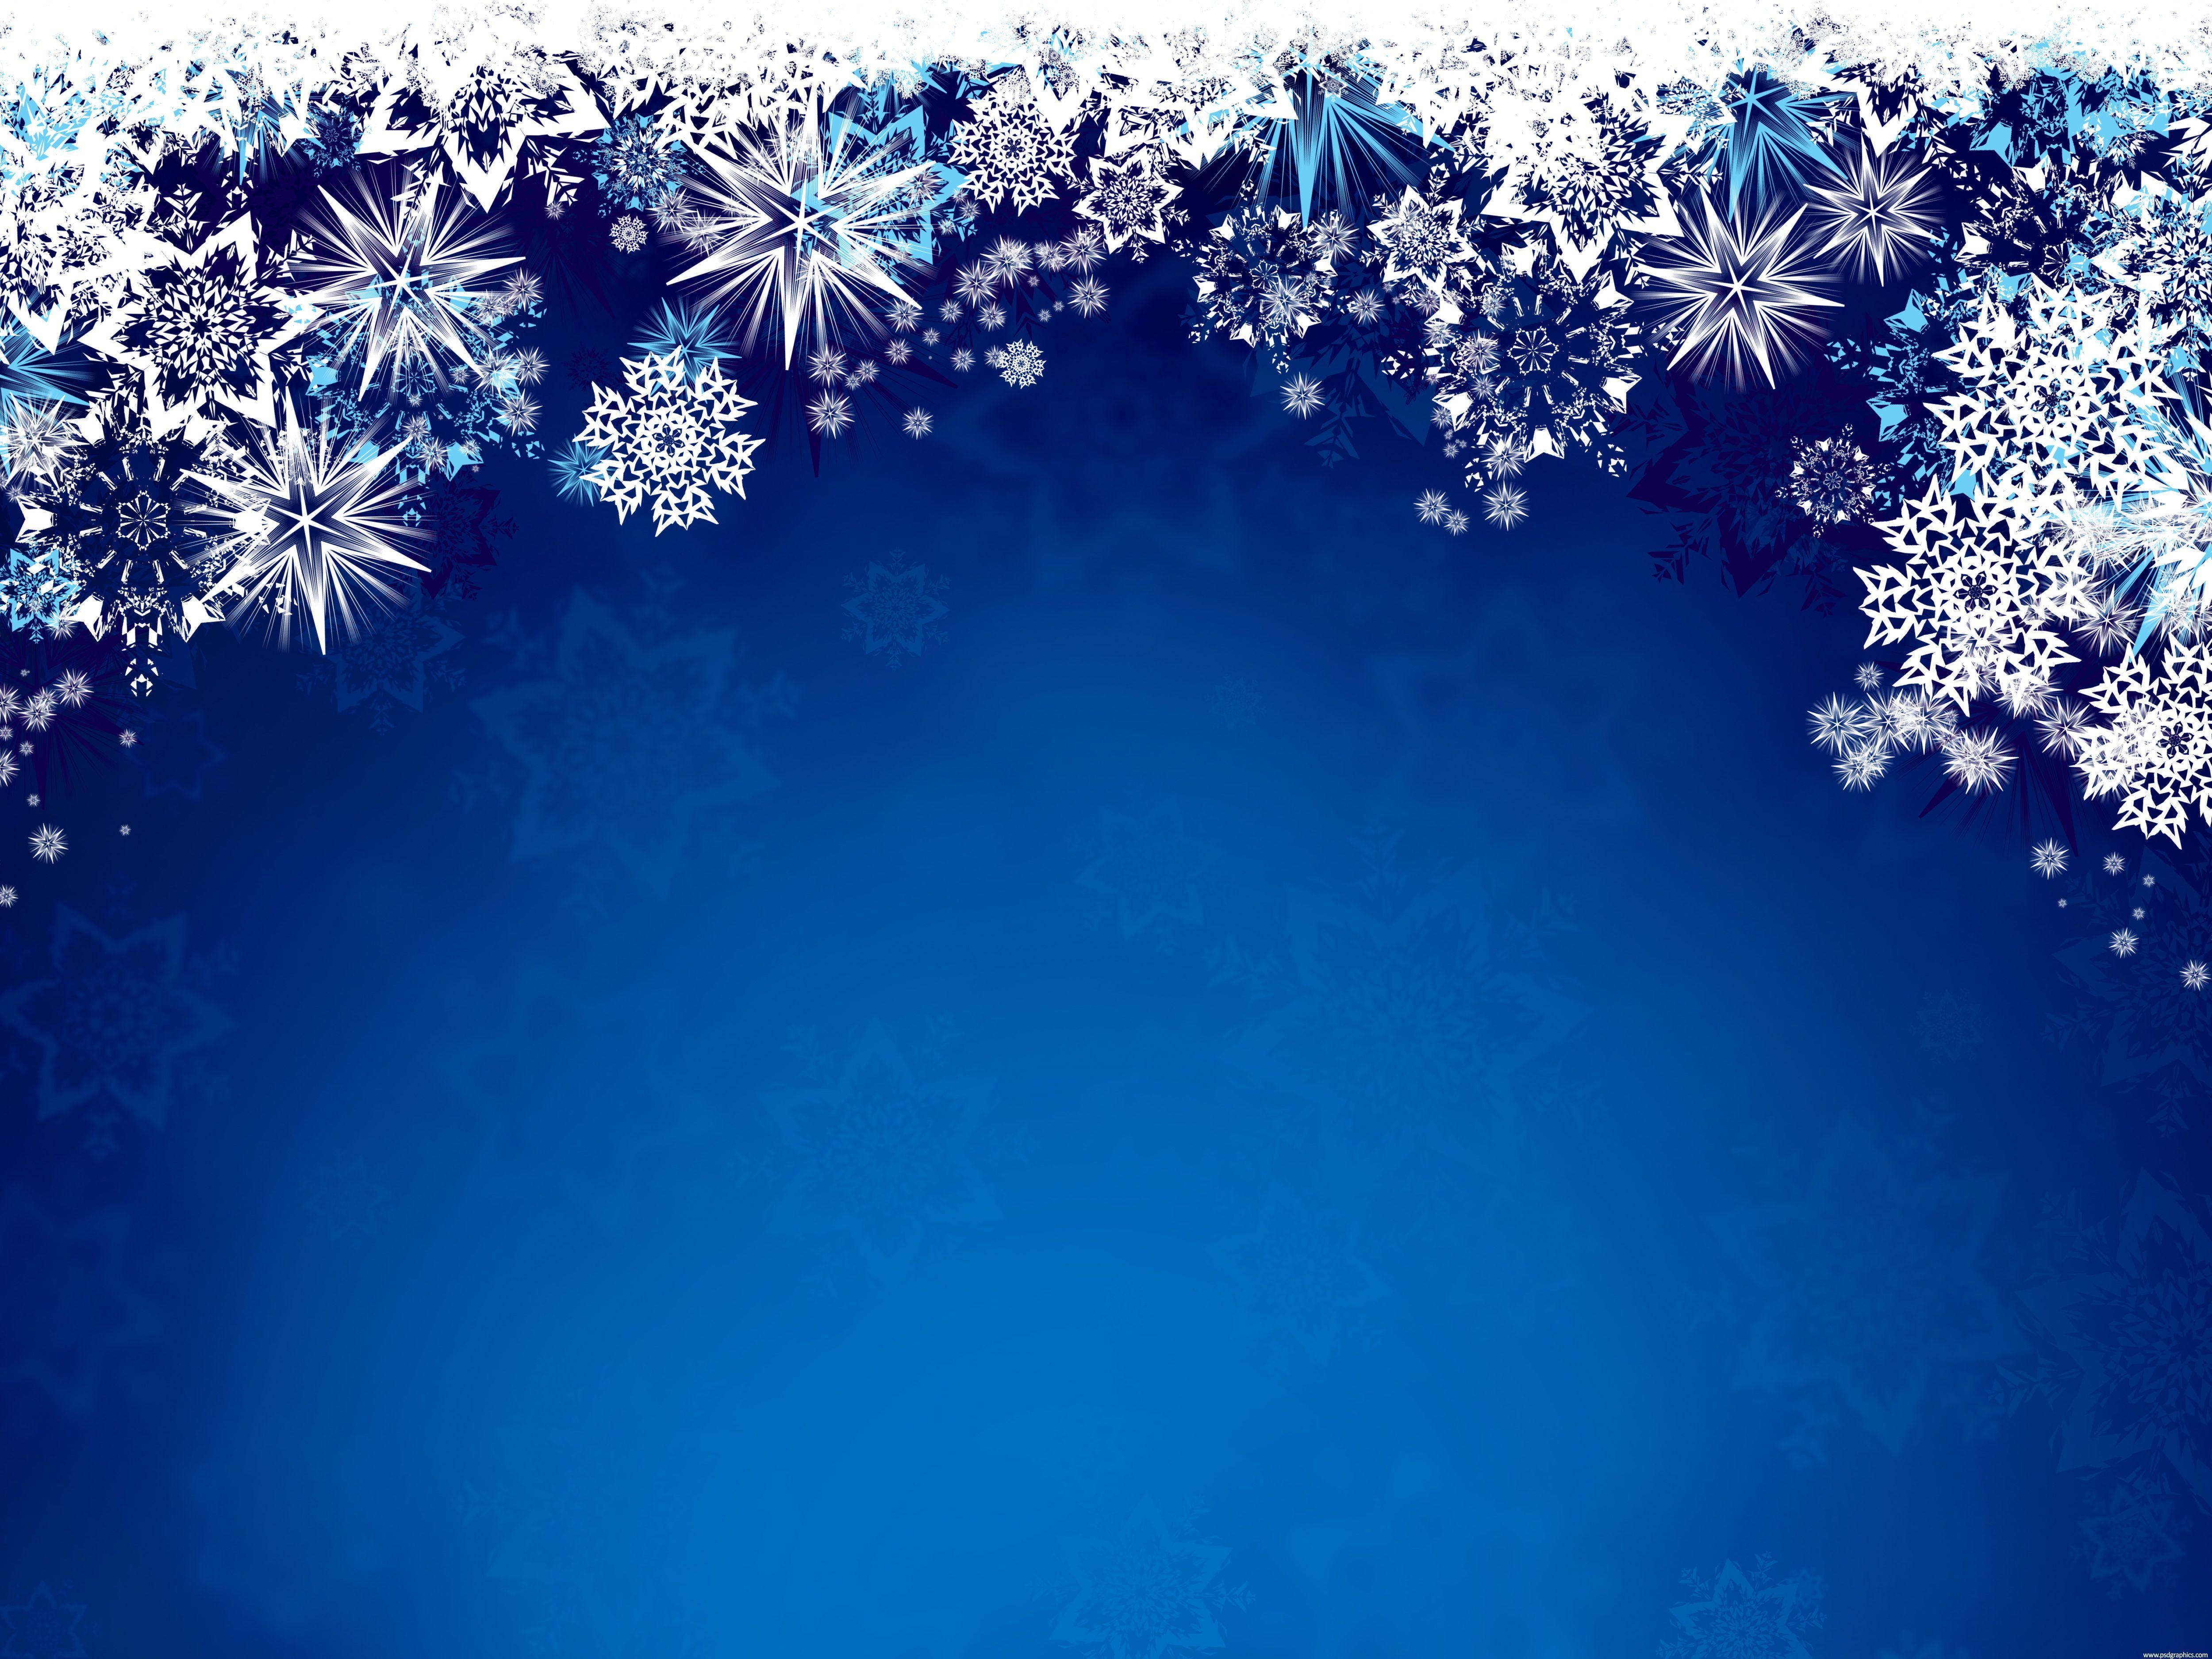 snowflake twitter backgrounds